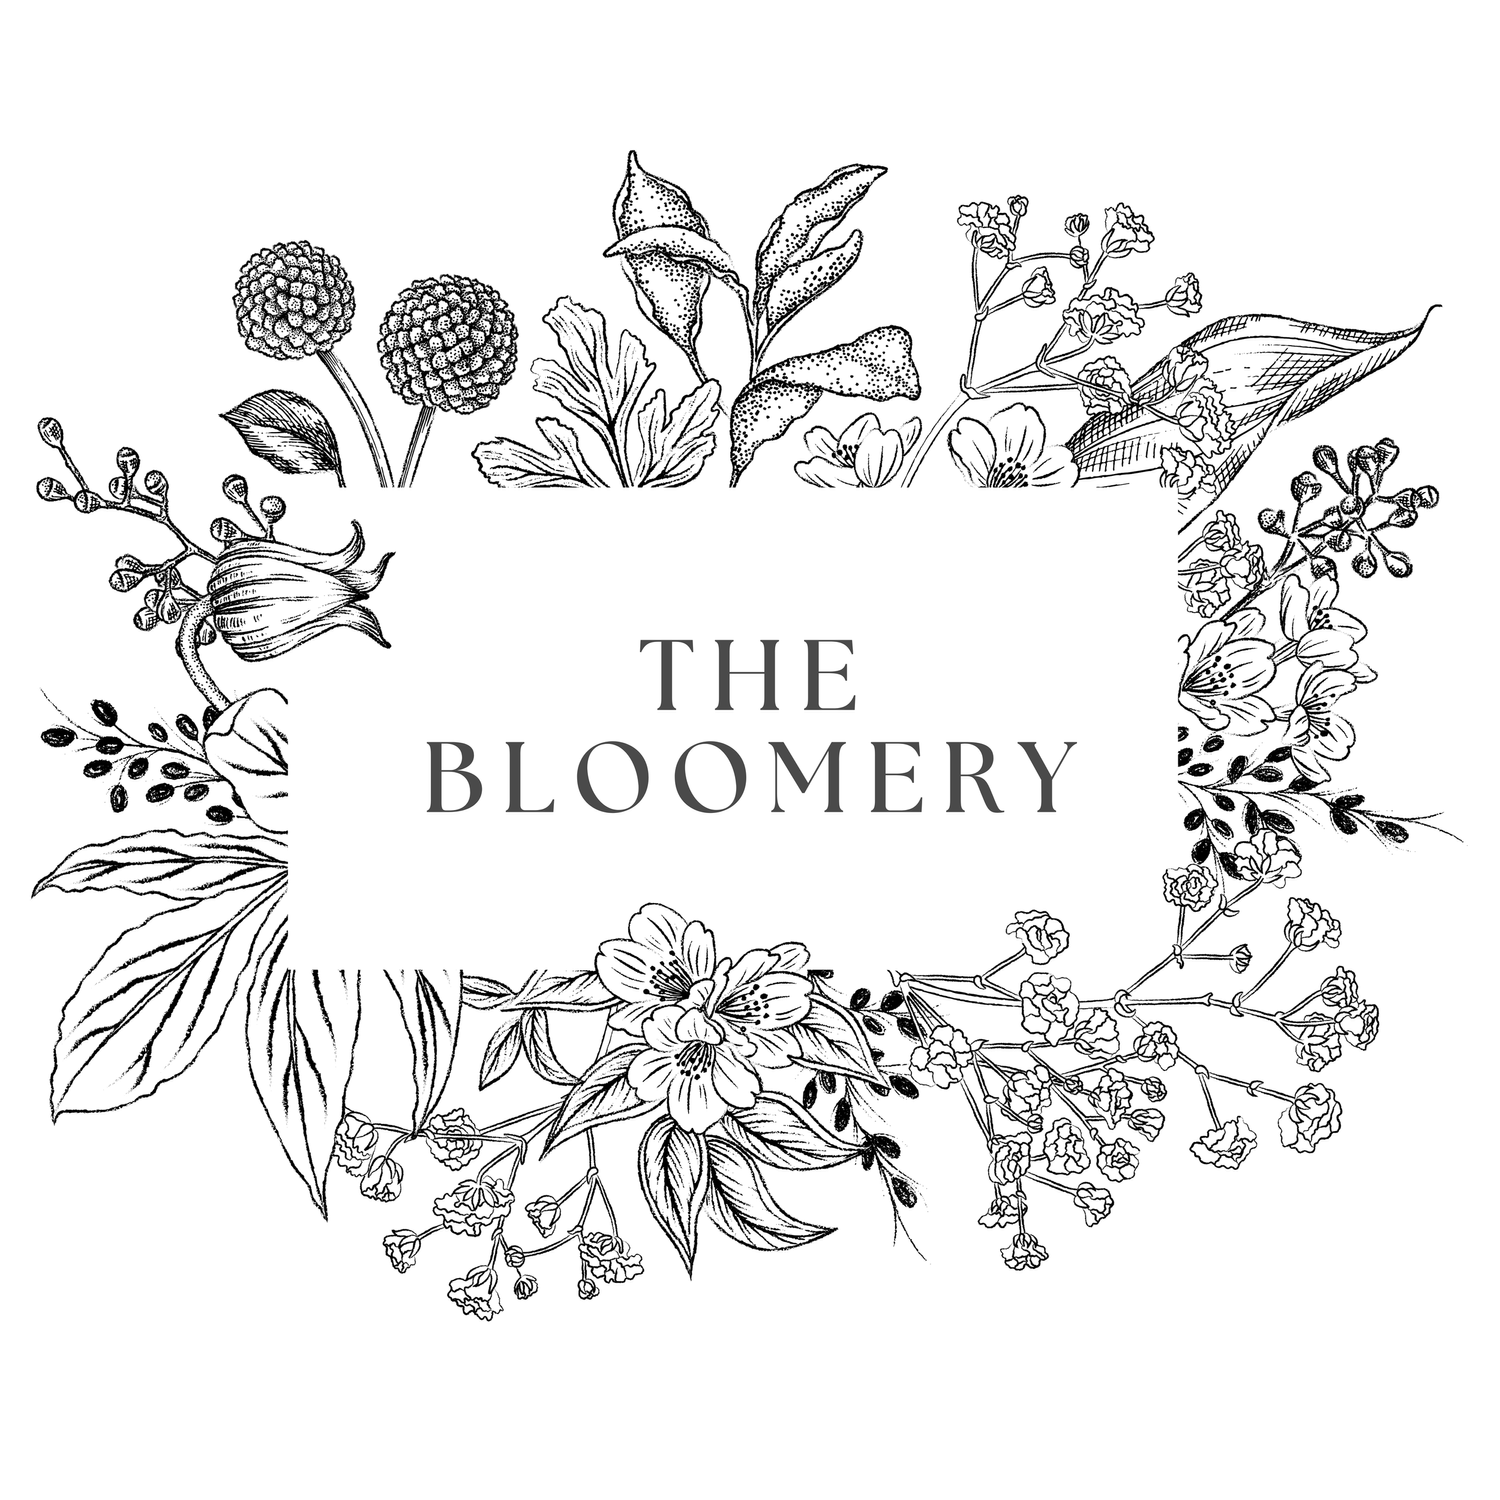 The Bloomery